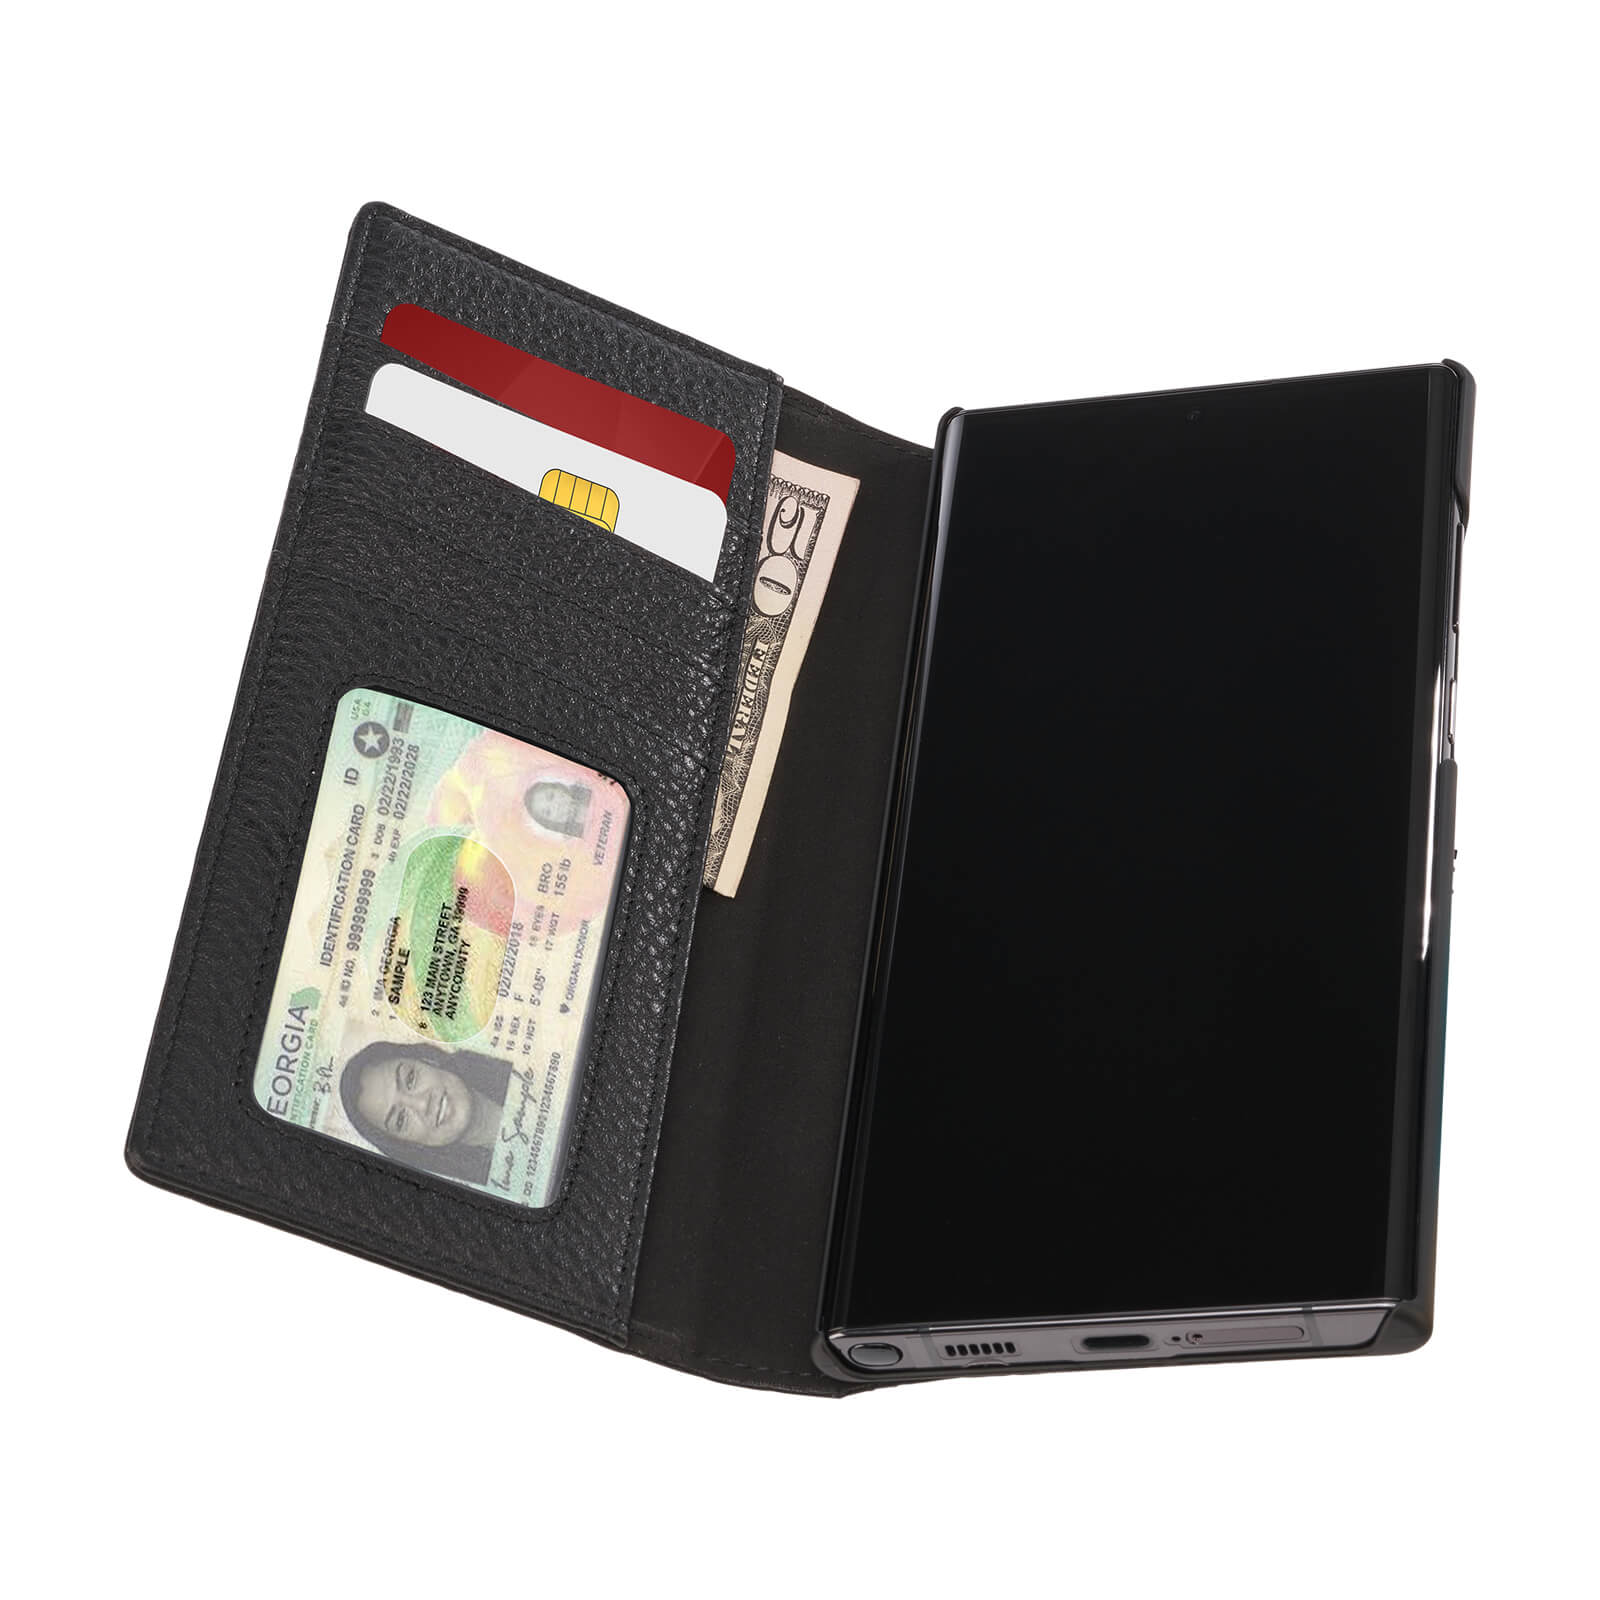 Case holds cards and cash. color::Black